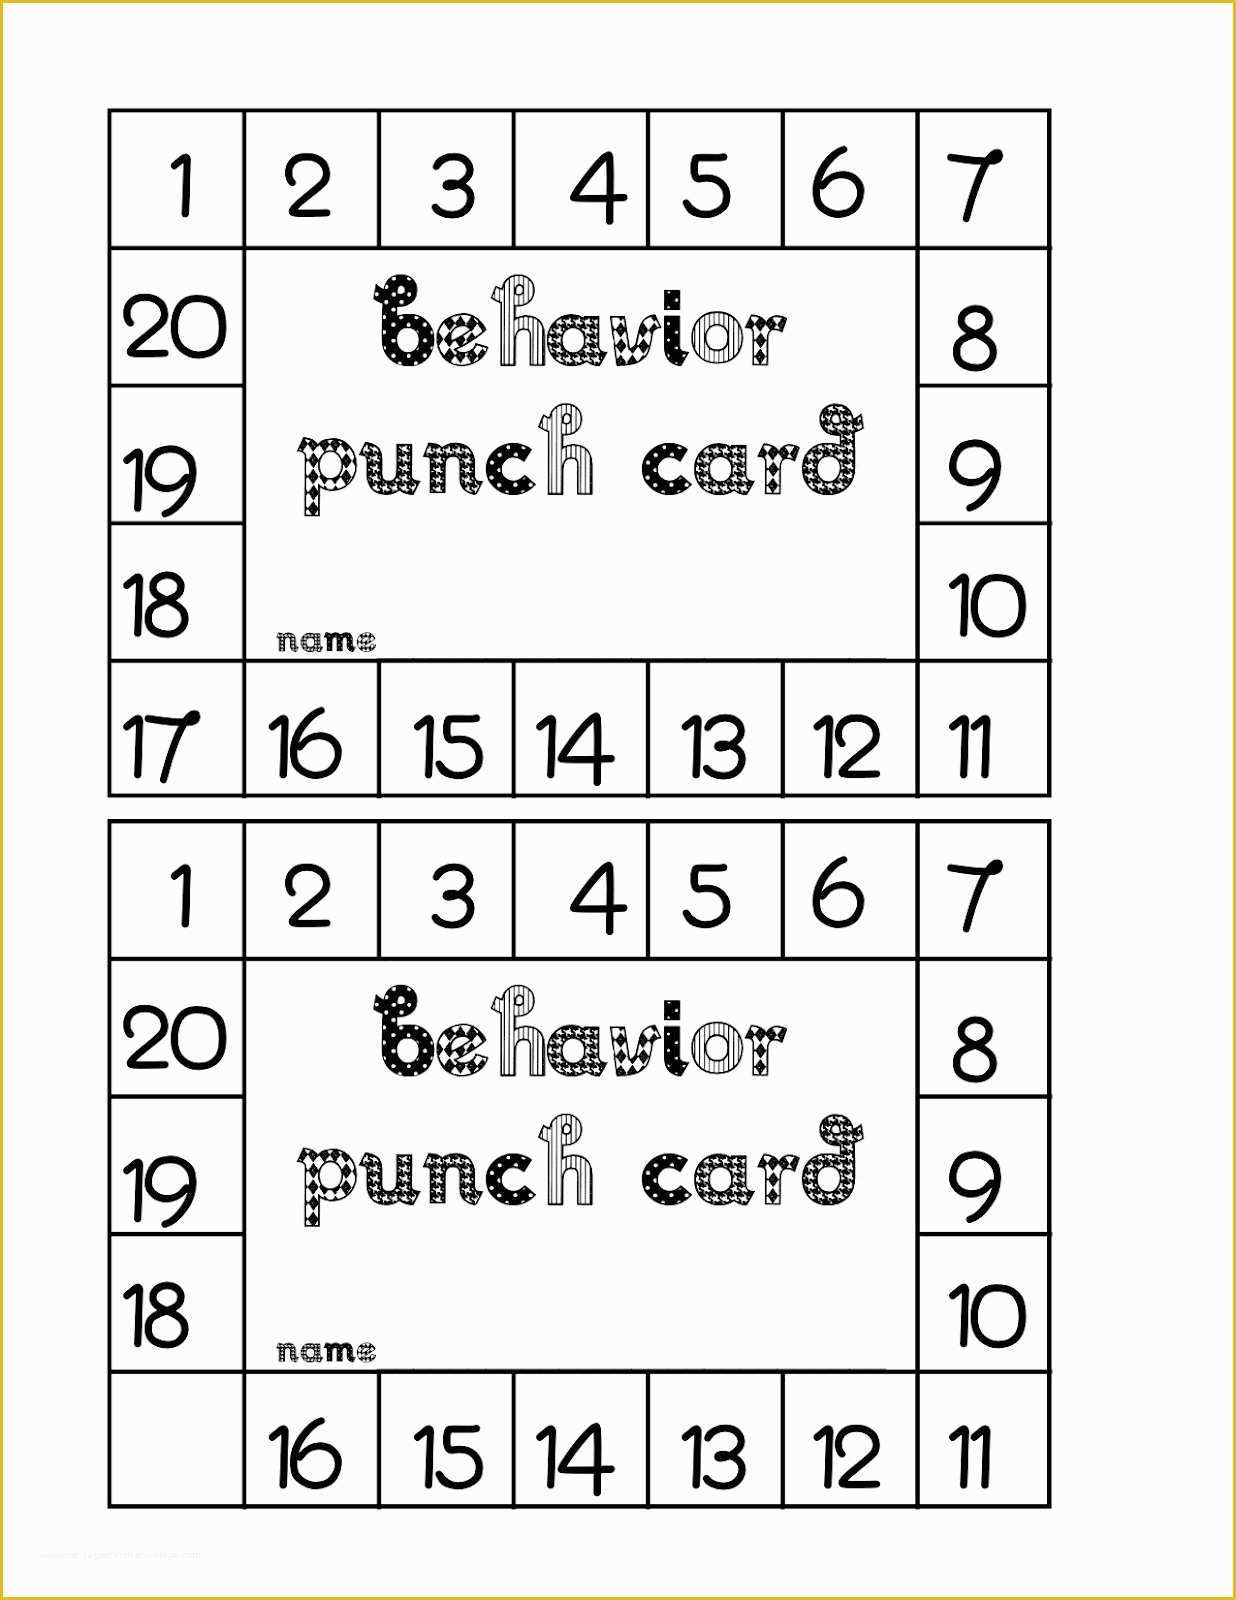 Free Printable Loyalty Card Template Of Behavior Punch Card Classroom Freebies